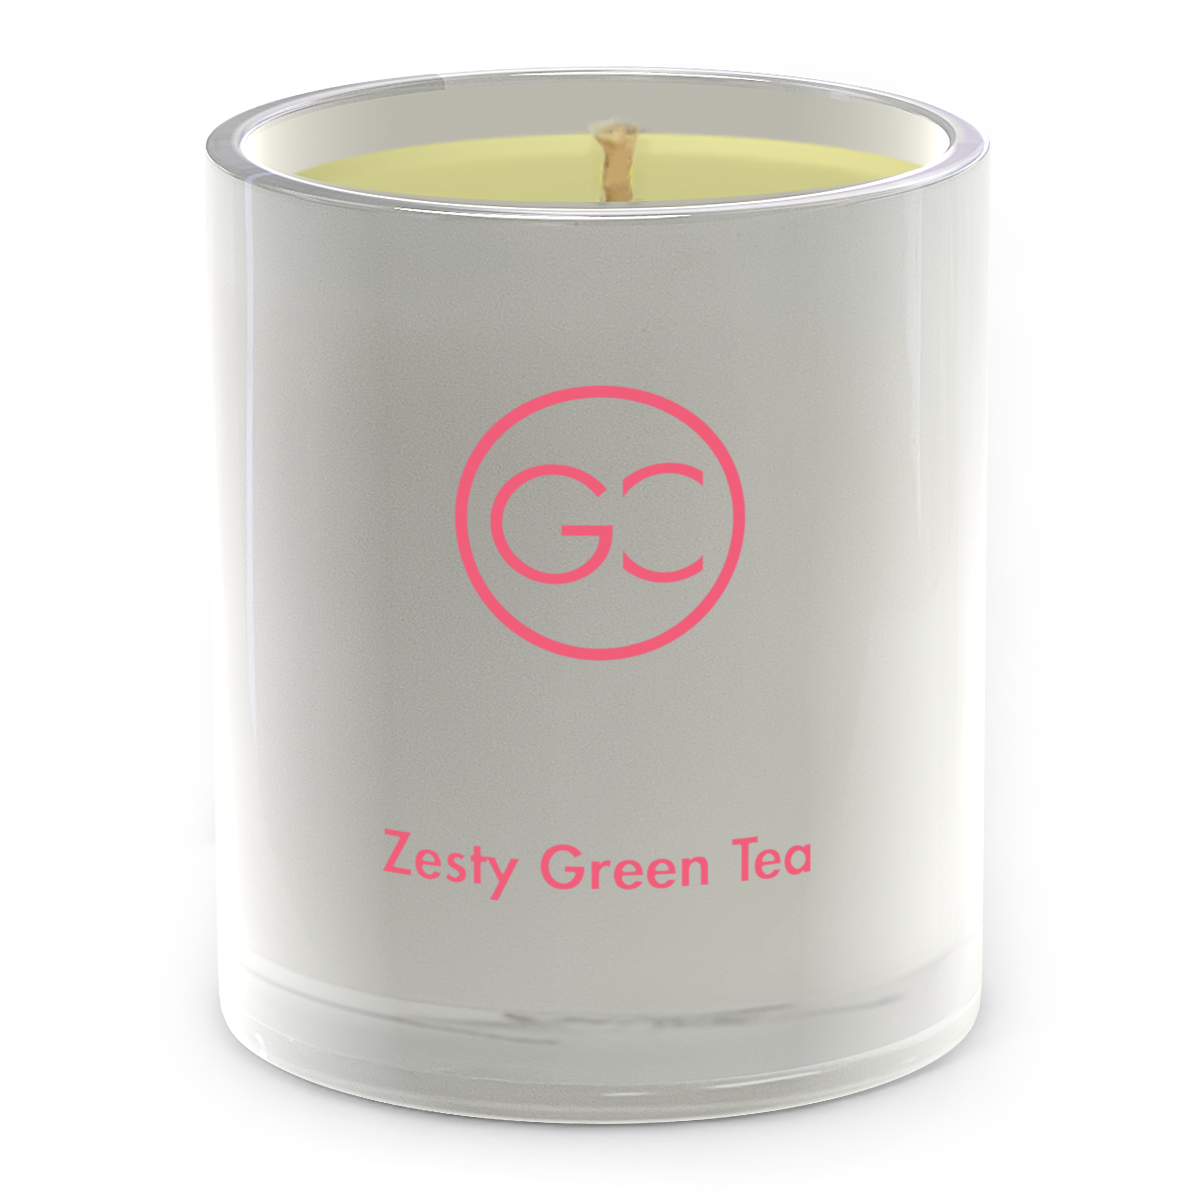 Zesty Green Tea Scented Soy Candle 55hr Burn